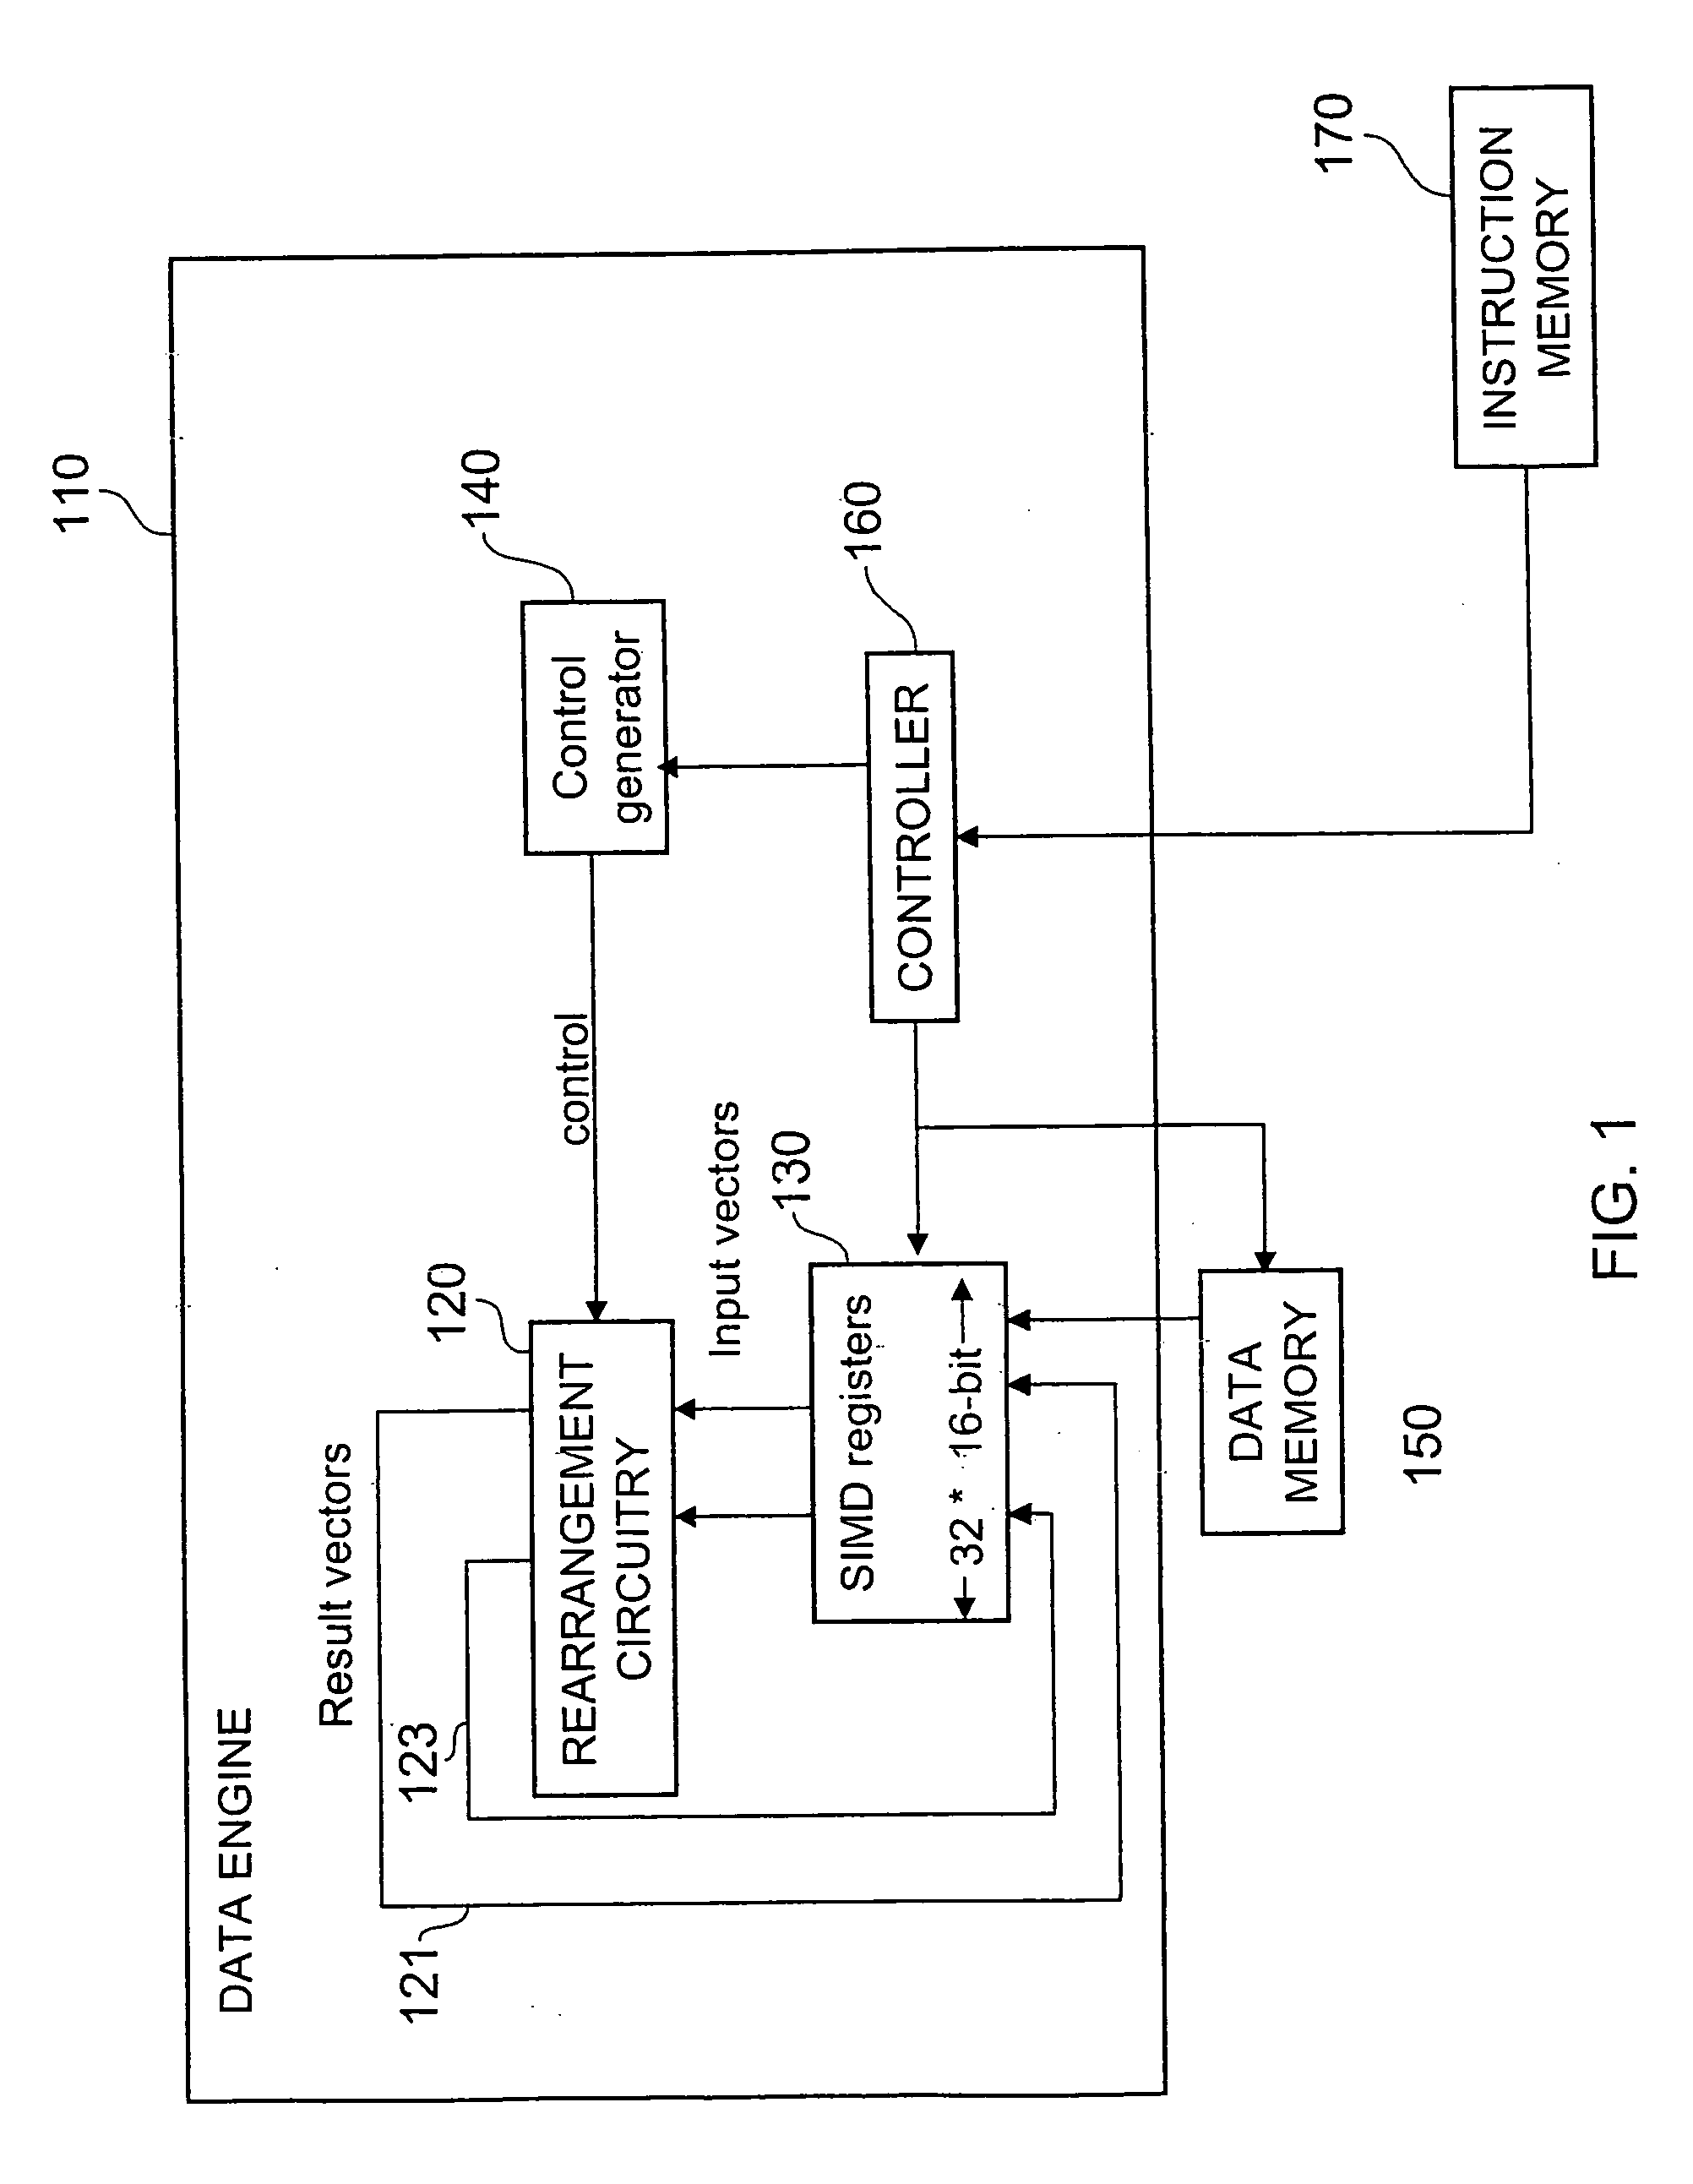 Data processing system for performing data rearrangement operations